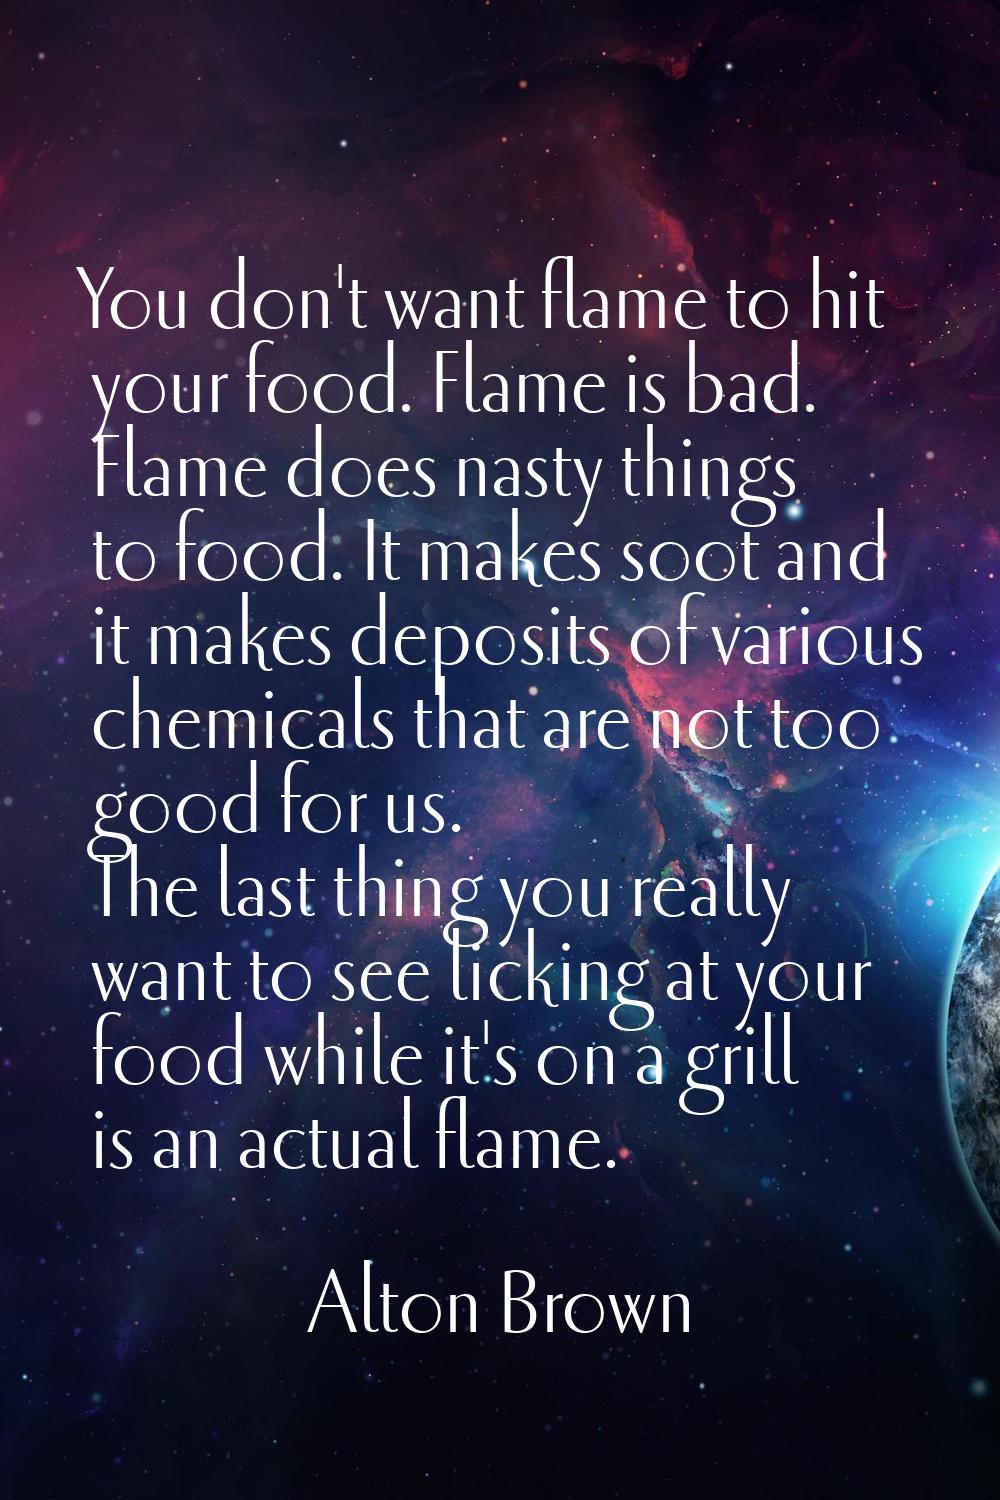 You don't want flame to hit your food. Flame is bad. Flame does nasty things to food. It makes soot